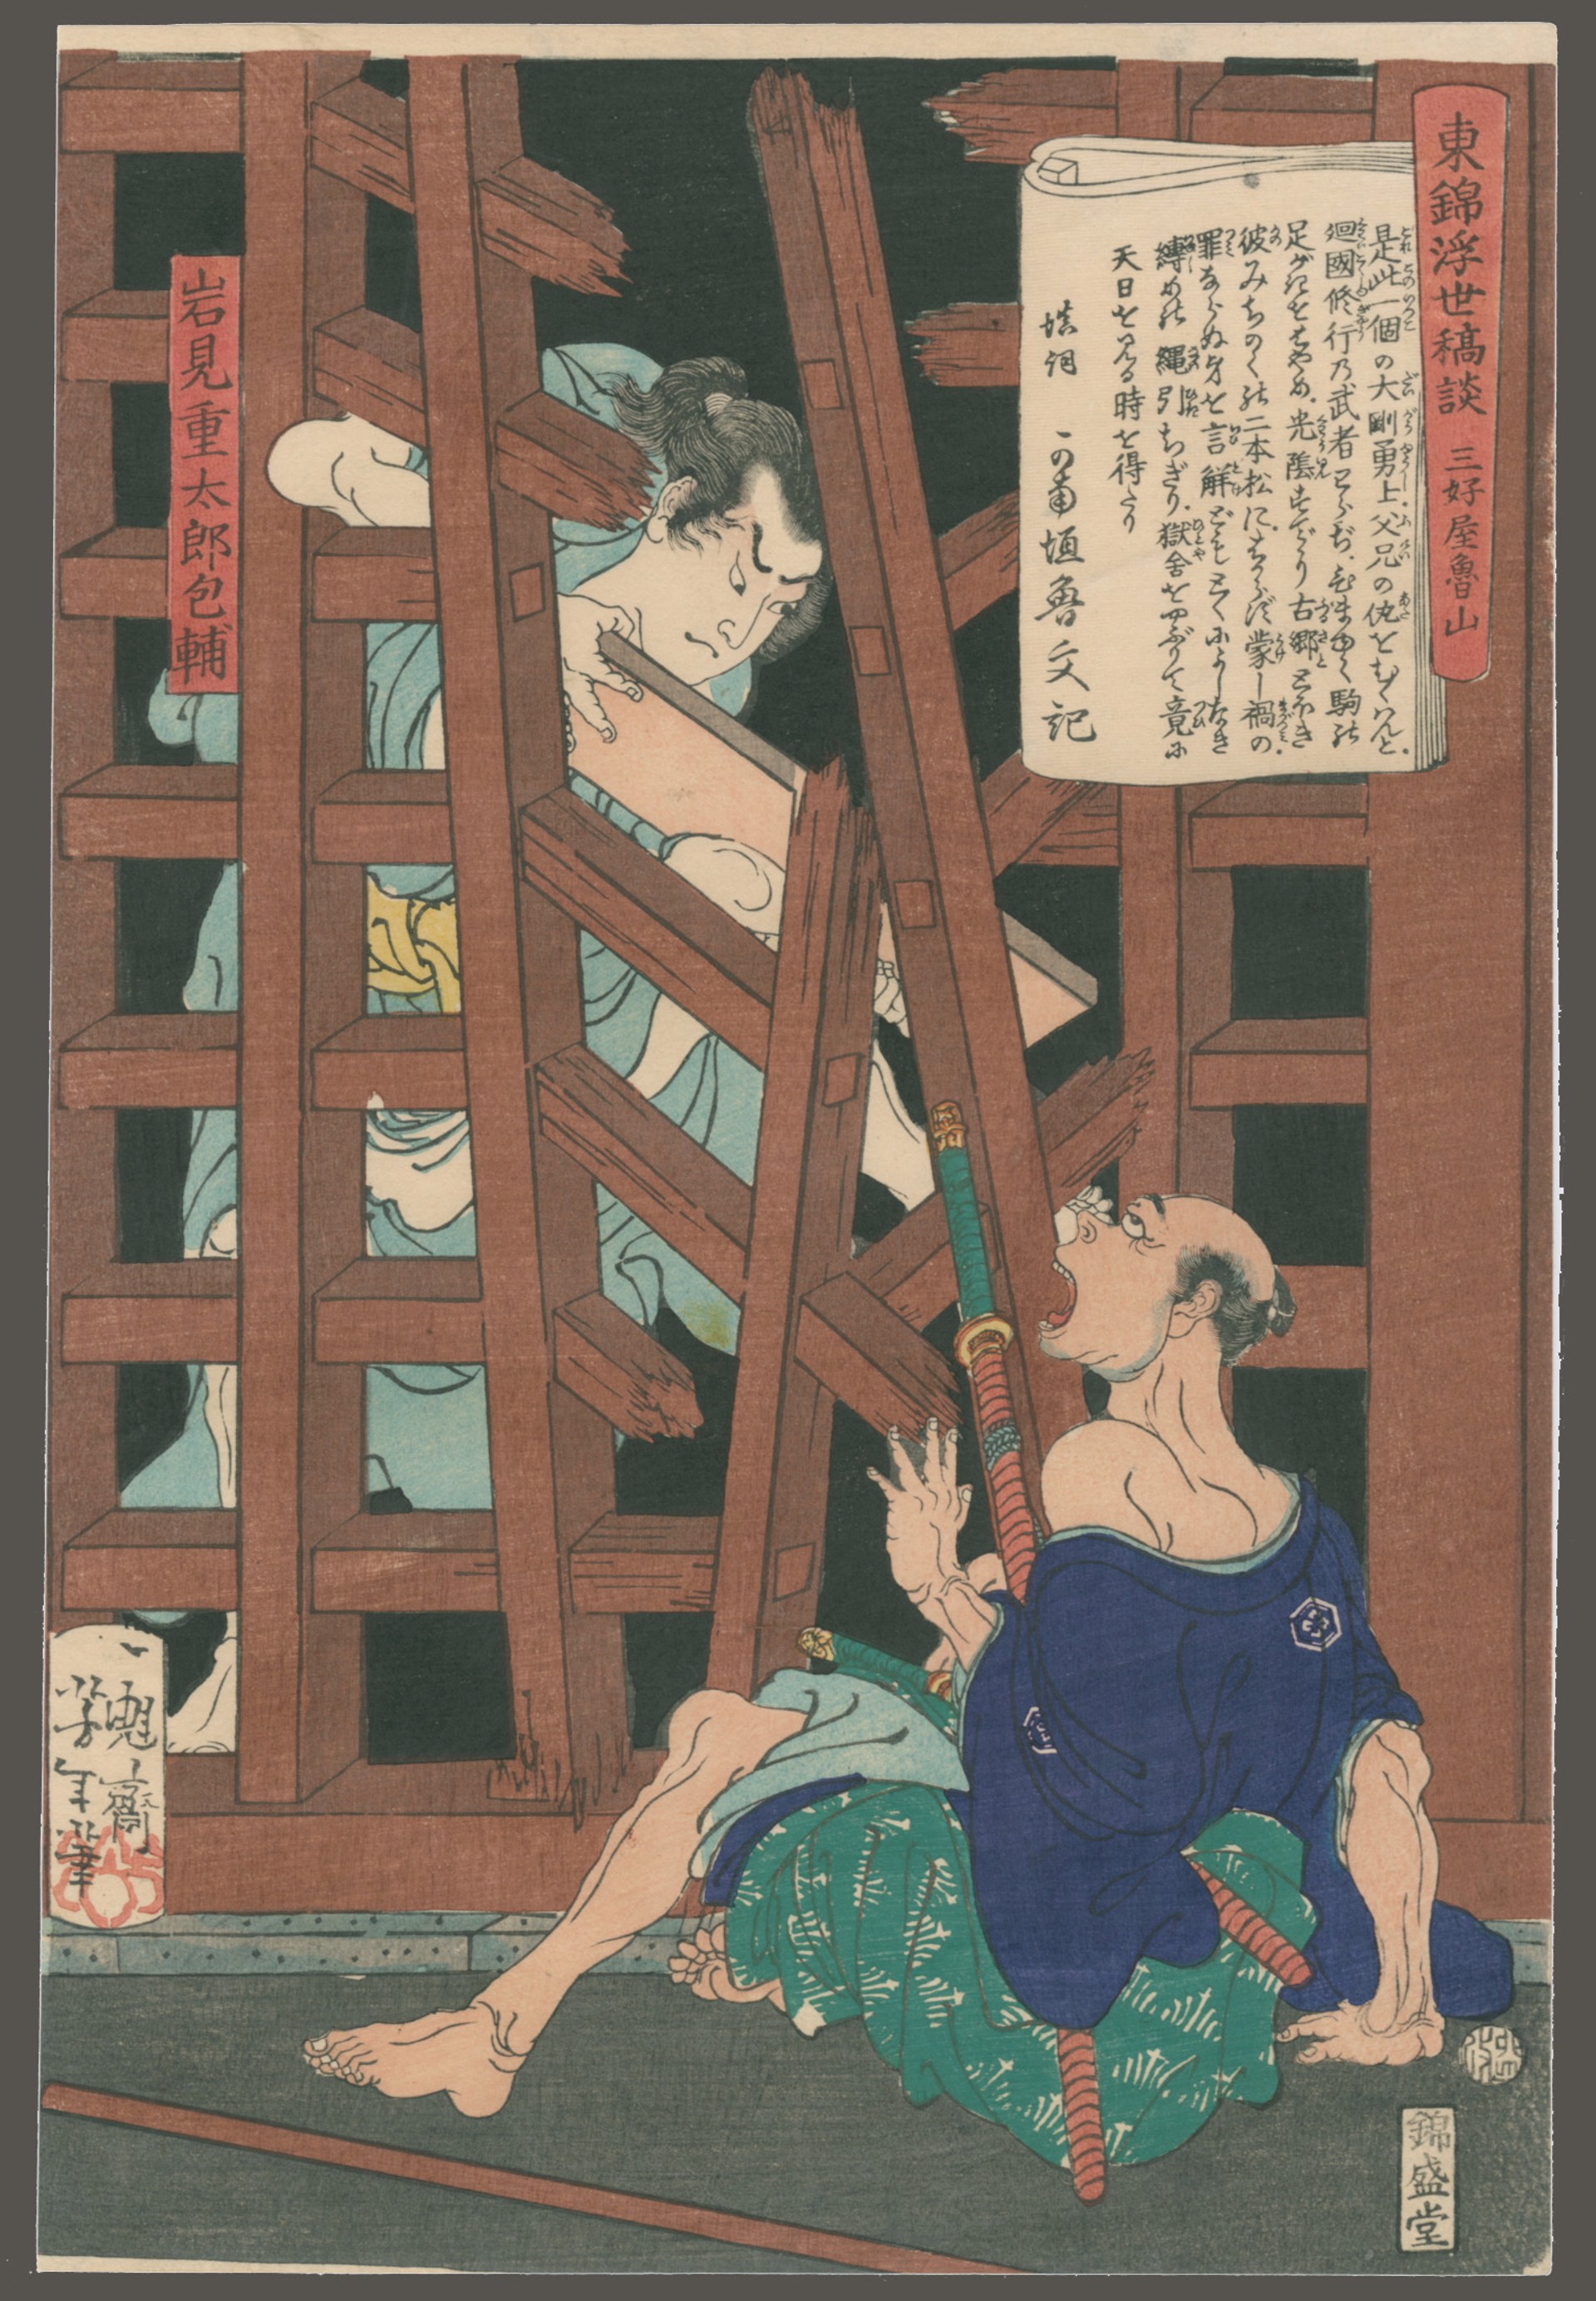 Iwami Jutaro Breaking Through a Fence Tales of the Floating World on Eastern Brocade by Yoshitoshi